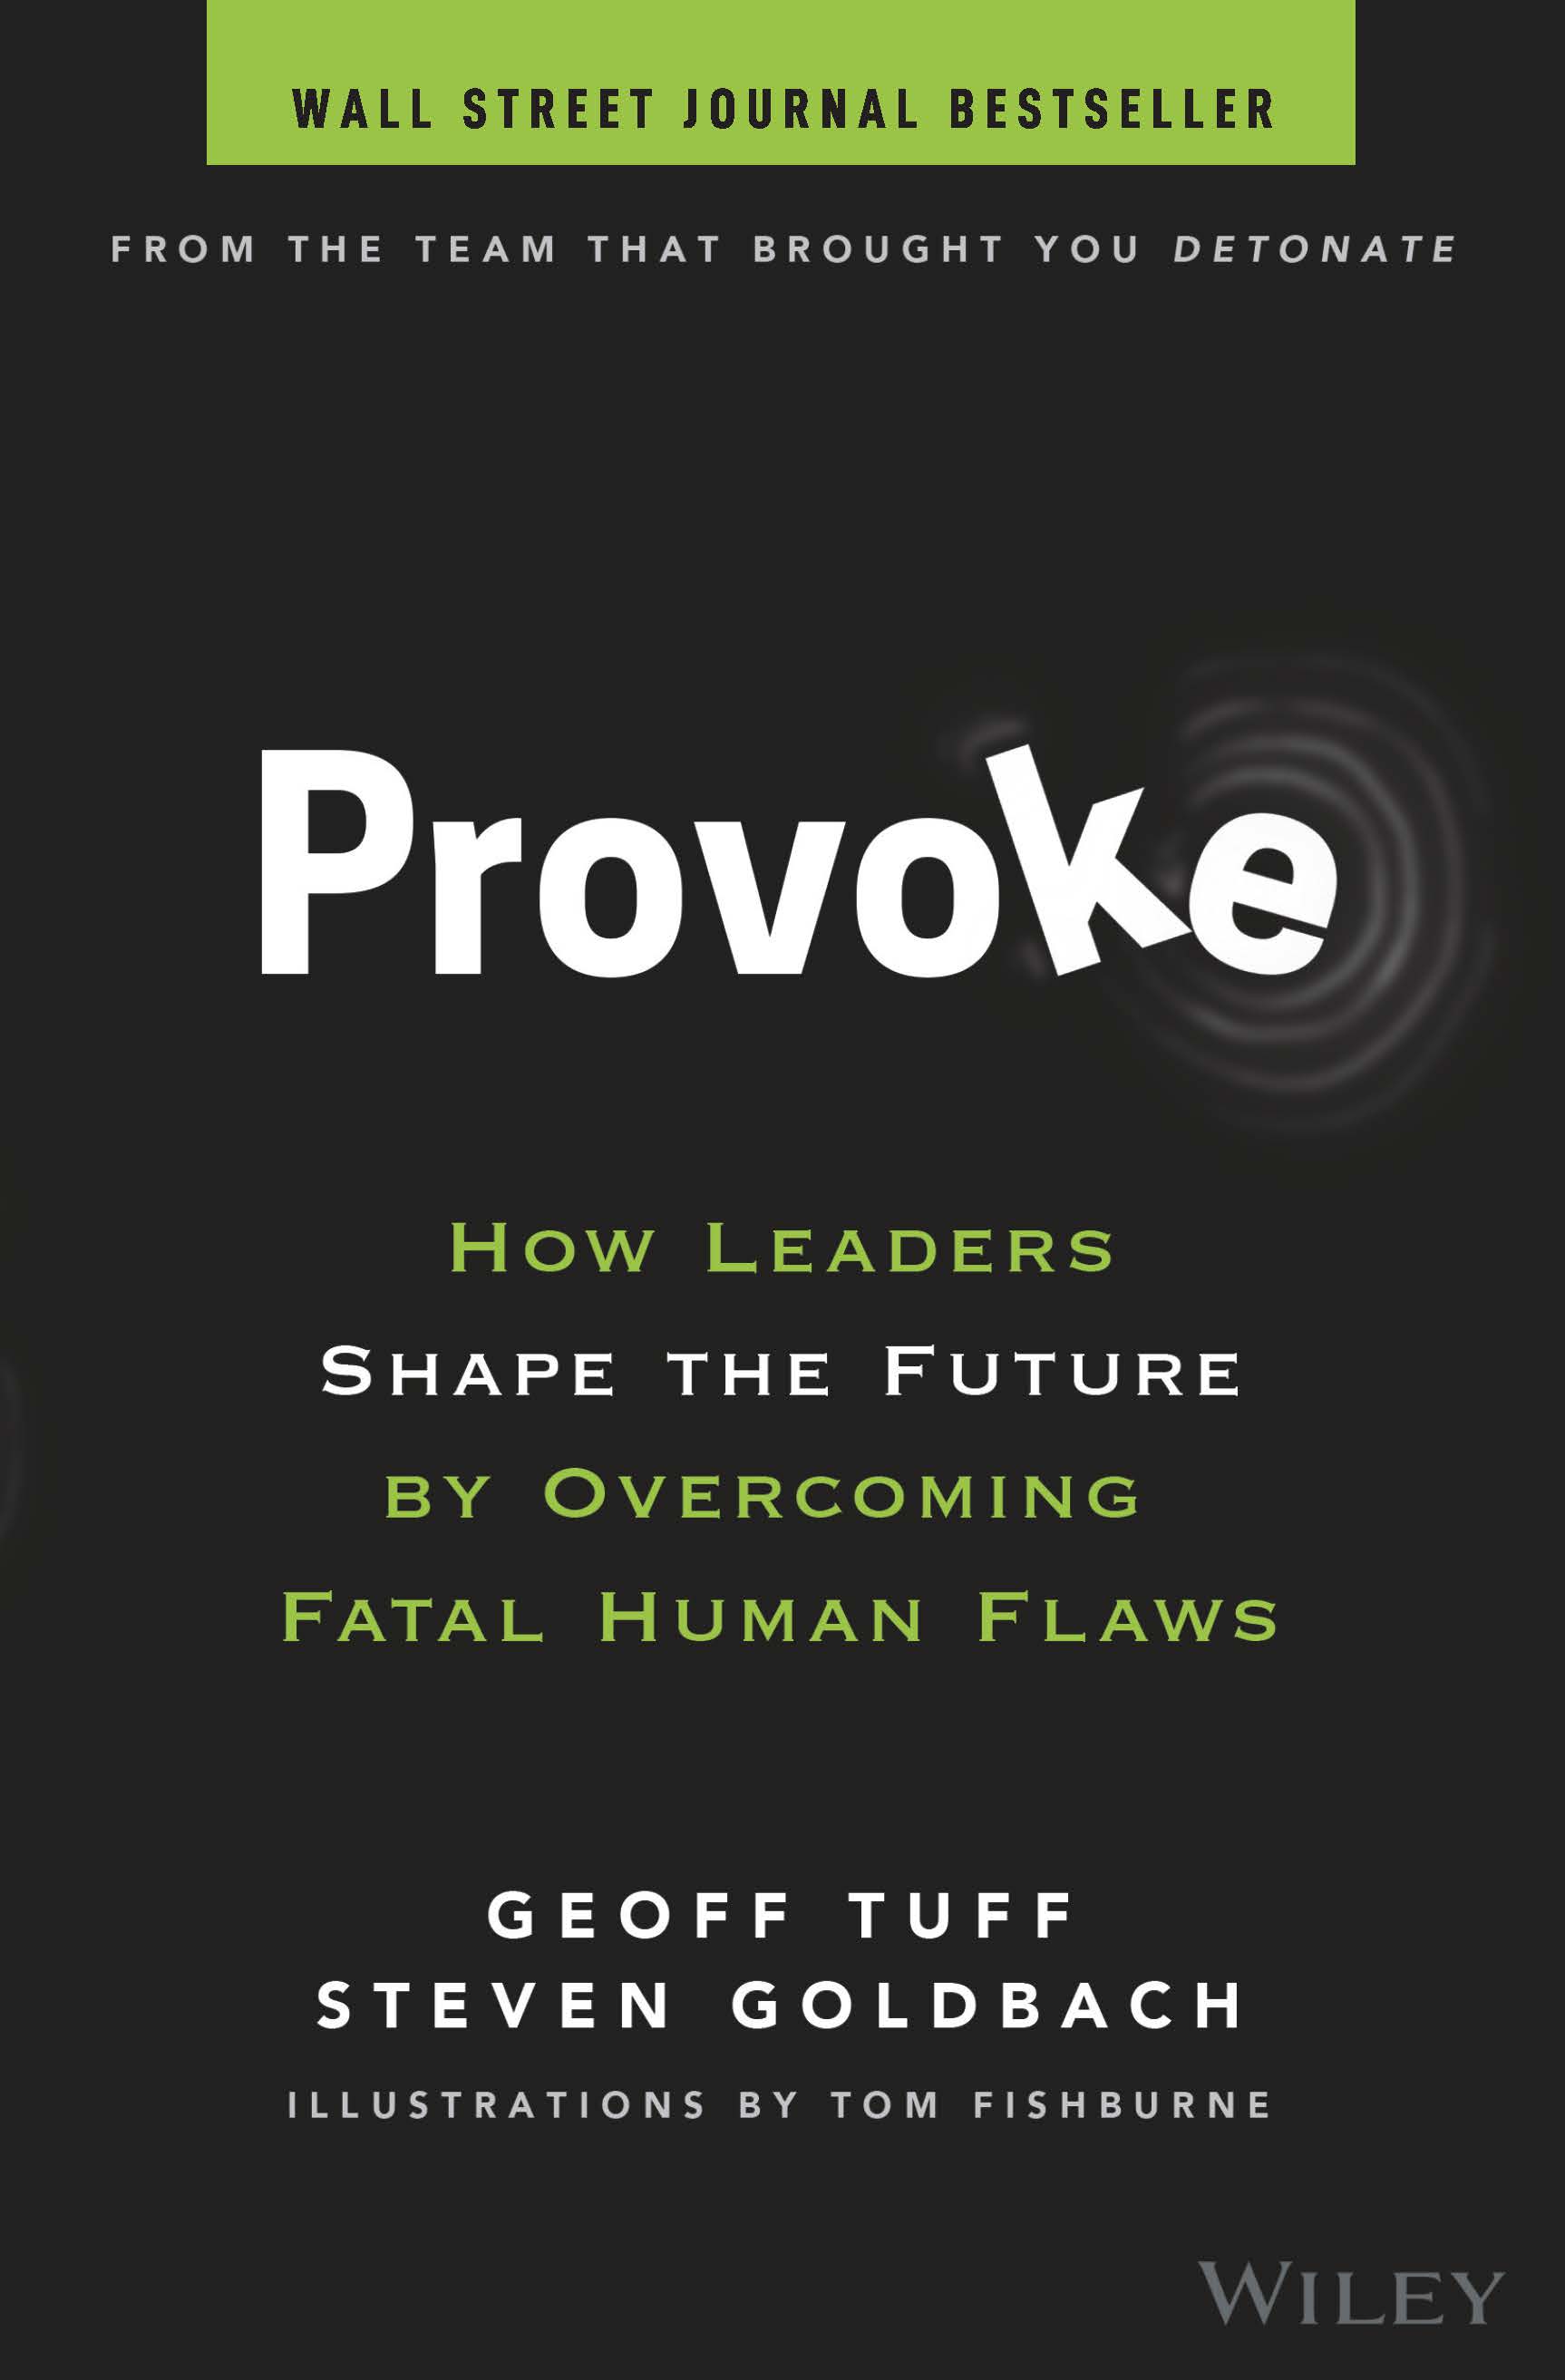  Provoke: How Leaders Shape the Future by Overcoming Fatal Human Flaws